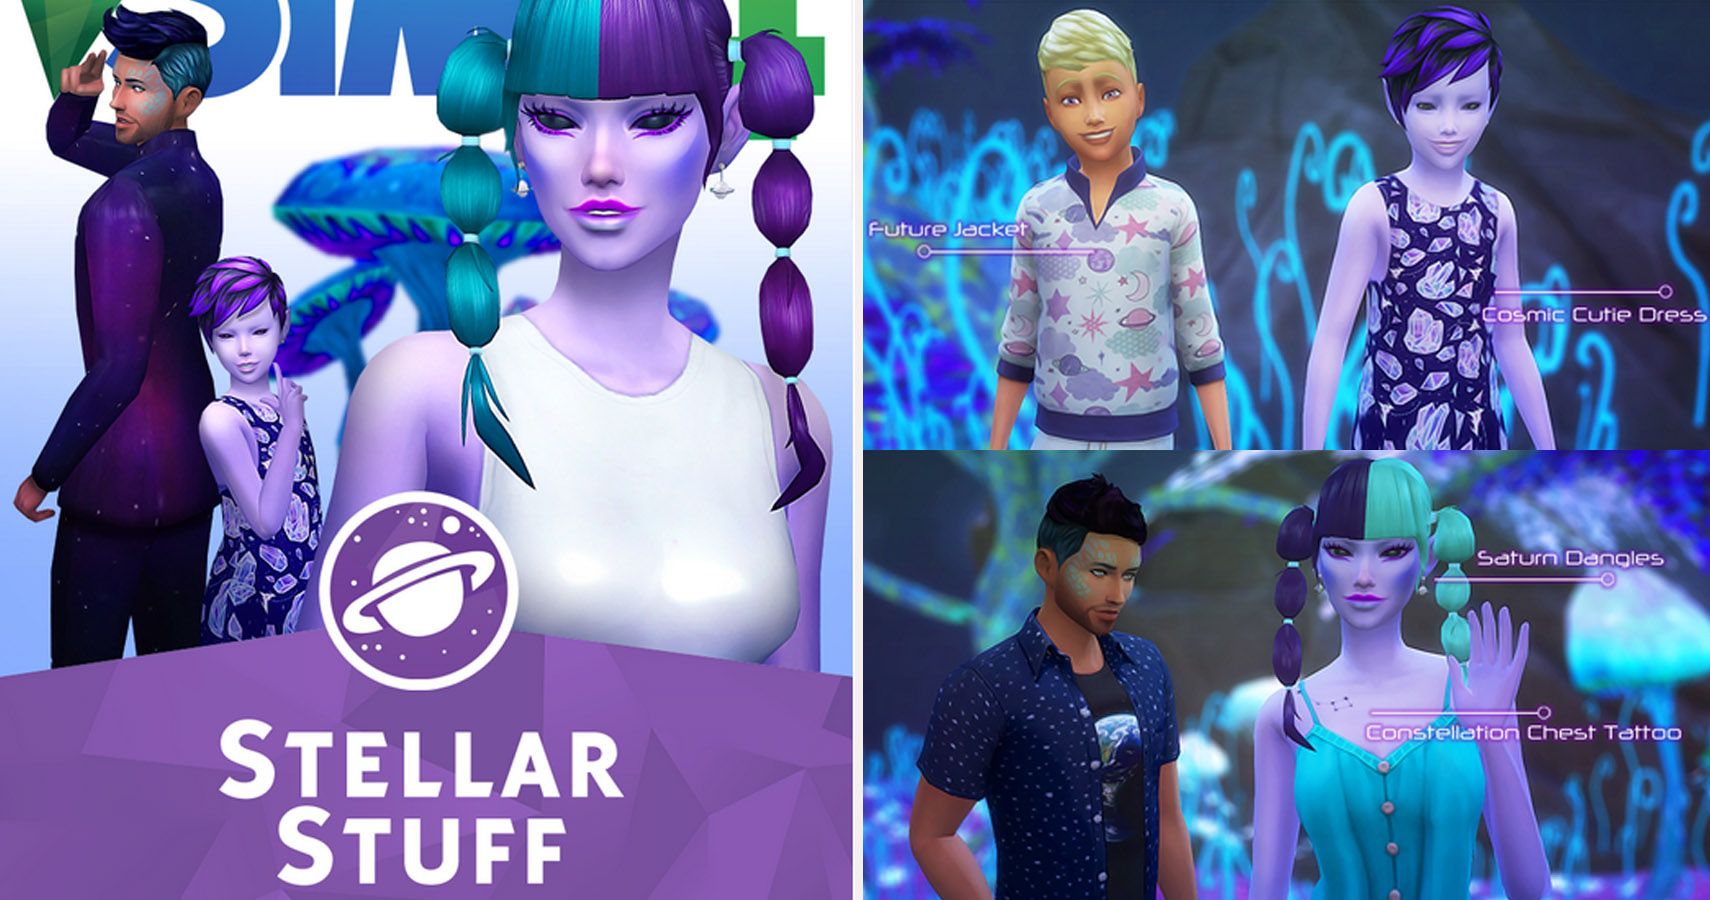 left side stuff pack style cover with alien sims. Right side wide shot of alien looking sims in cc clothing.